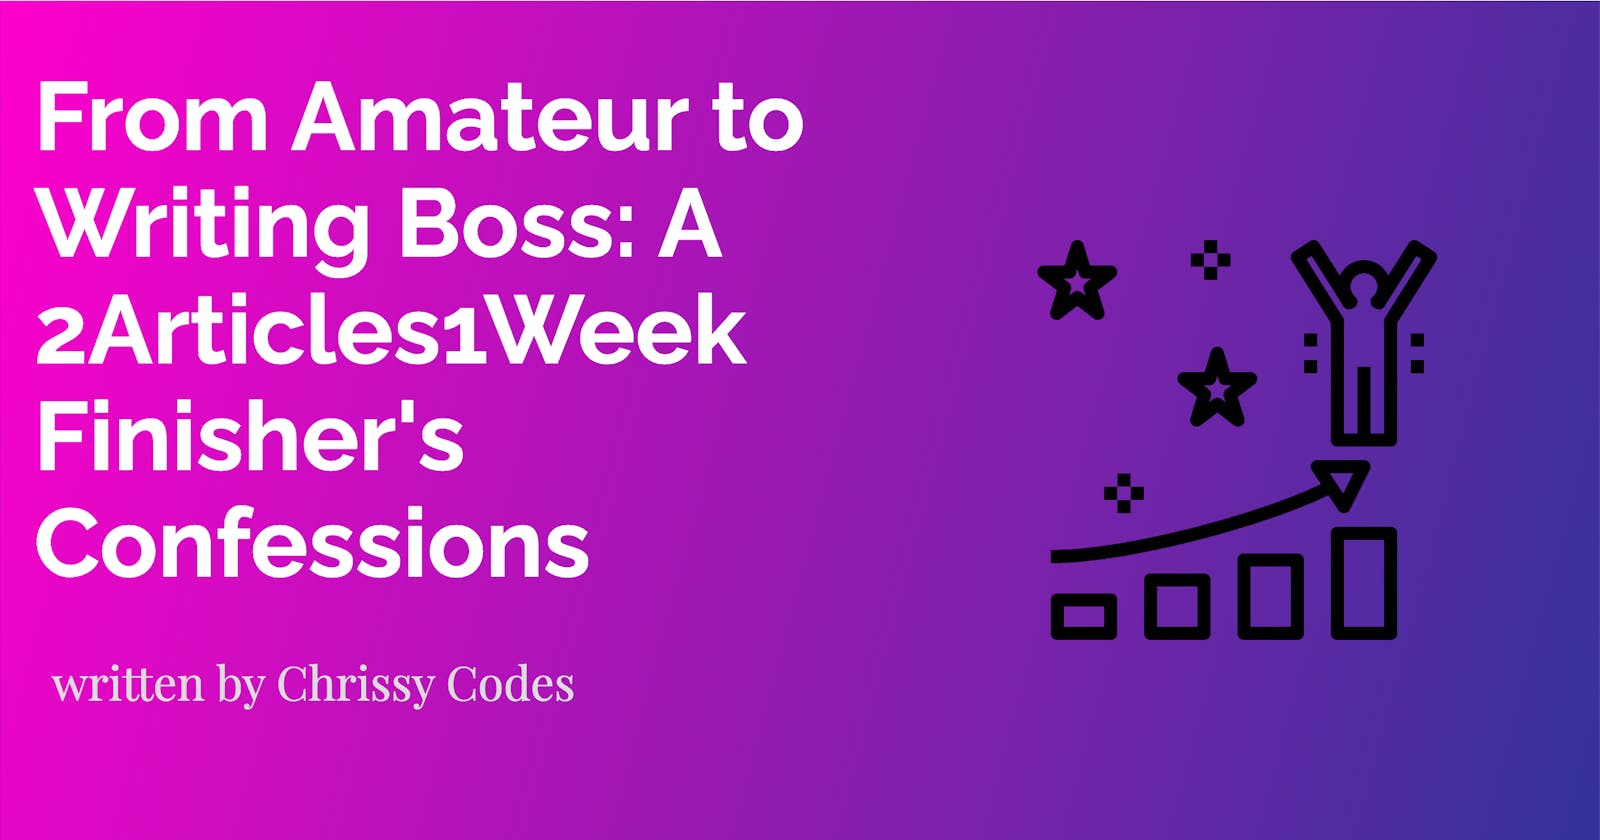 From Amateur to Writing Boss: A 2Articles1Week Finisher's Confessions